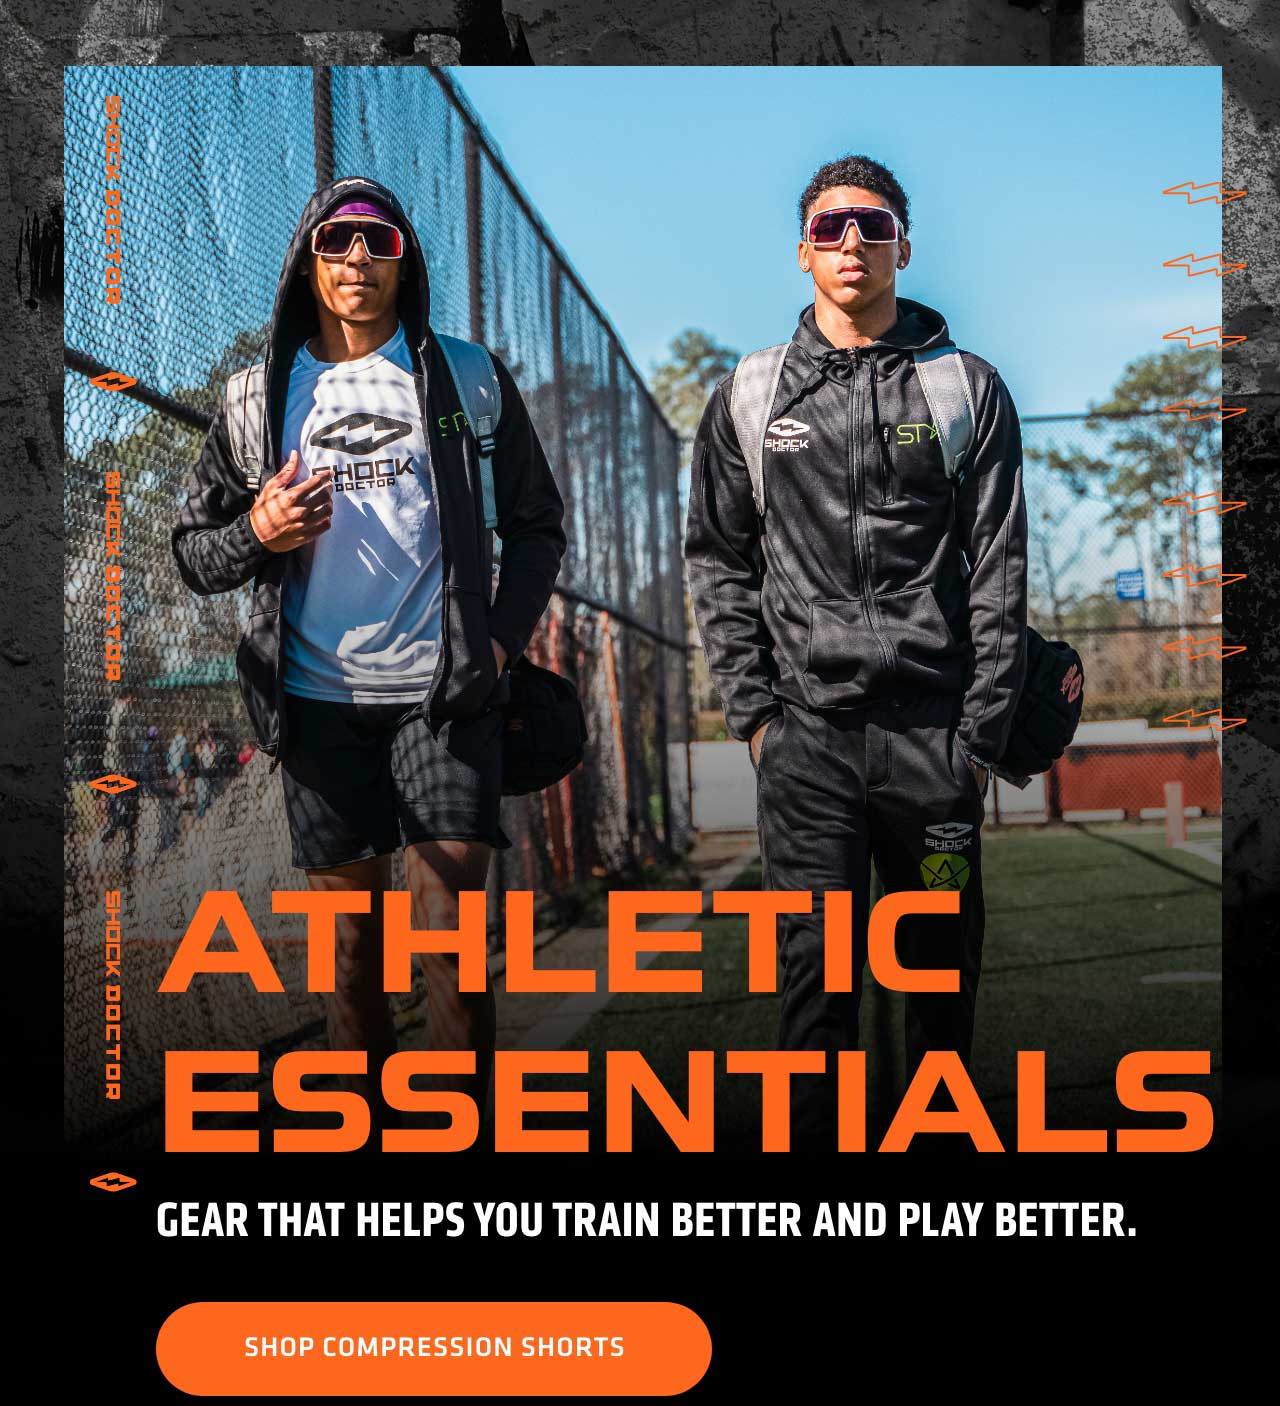 Athletic Essentials - Gear That Helps You Train Better And Play Better - Shop Compression Shorts